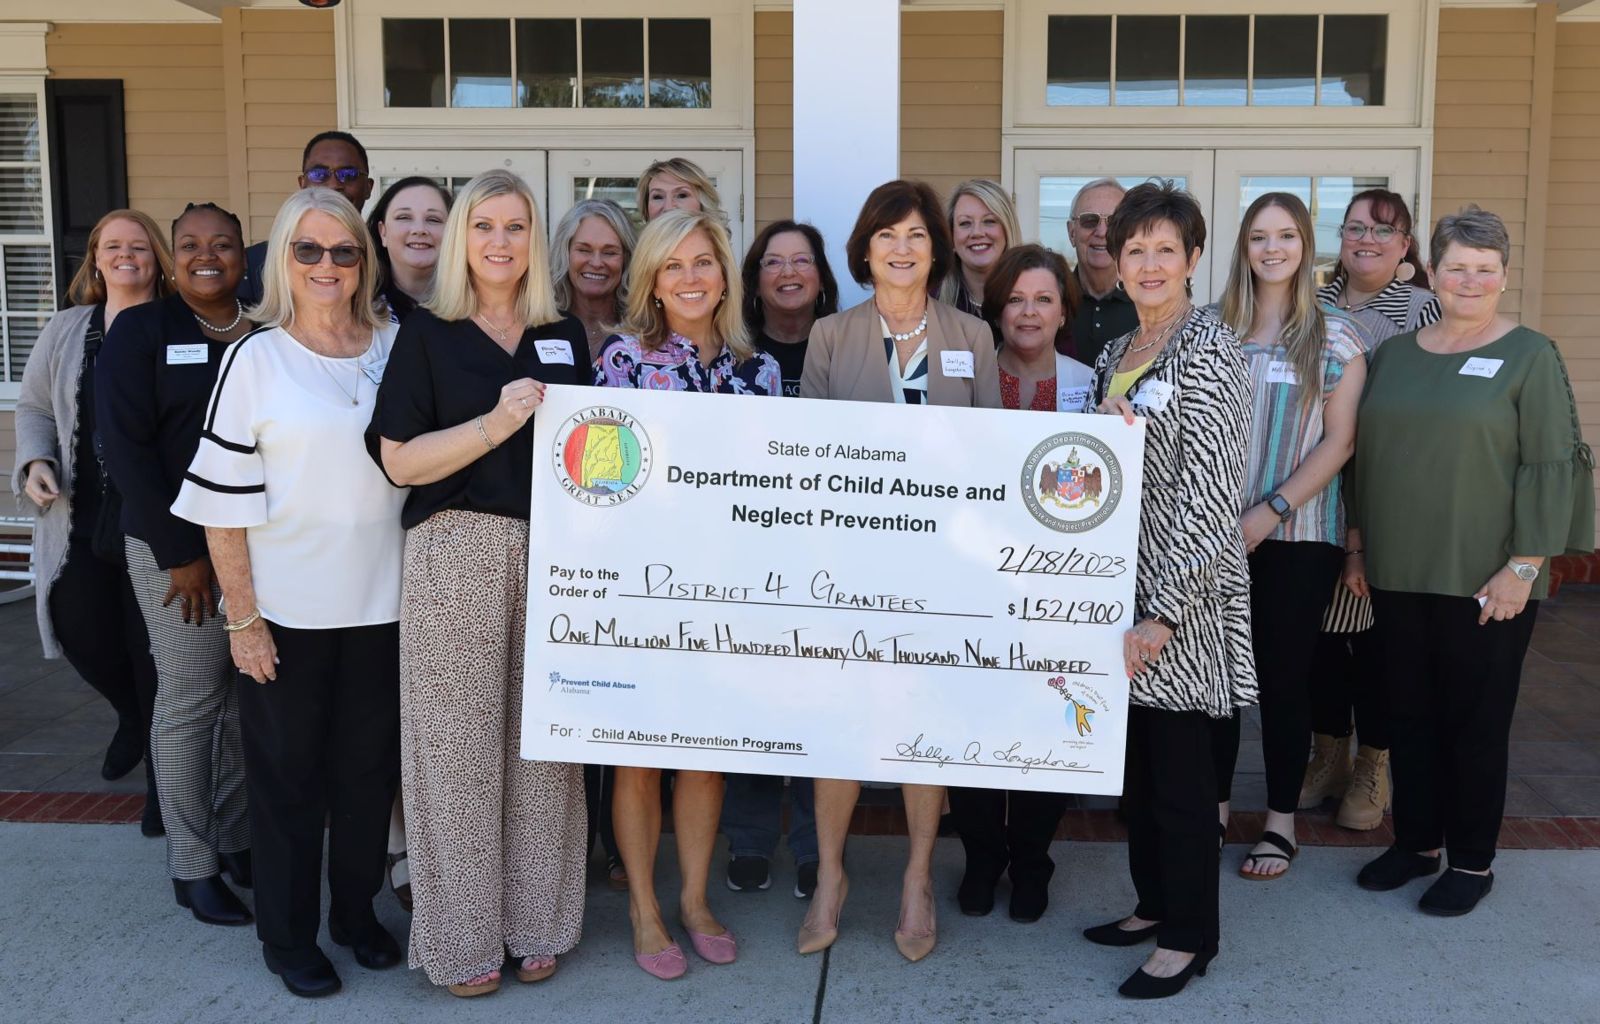 Other local organizations that were recipients with Gadsden State include Family Success Center of Etowah County, Gadsden City Schools and United Way's Success By 6.  Woody and Smith were in attendance representing Gadsden State at the District 4 check presentation Feb. 28 at Shepherds Cove Hospice in Albertville.